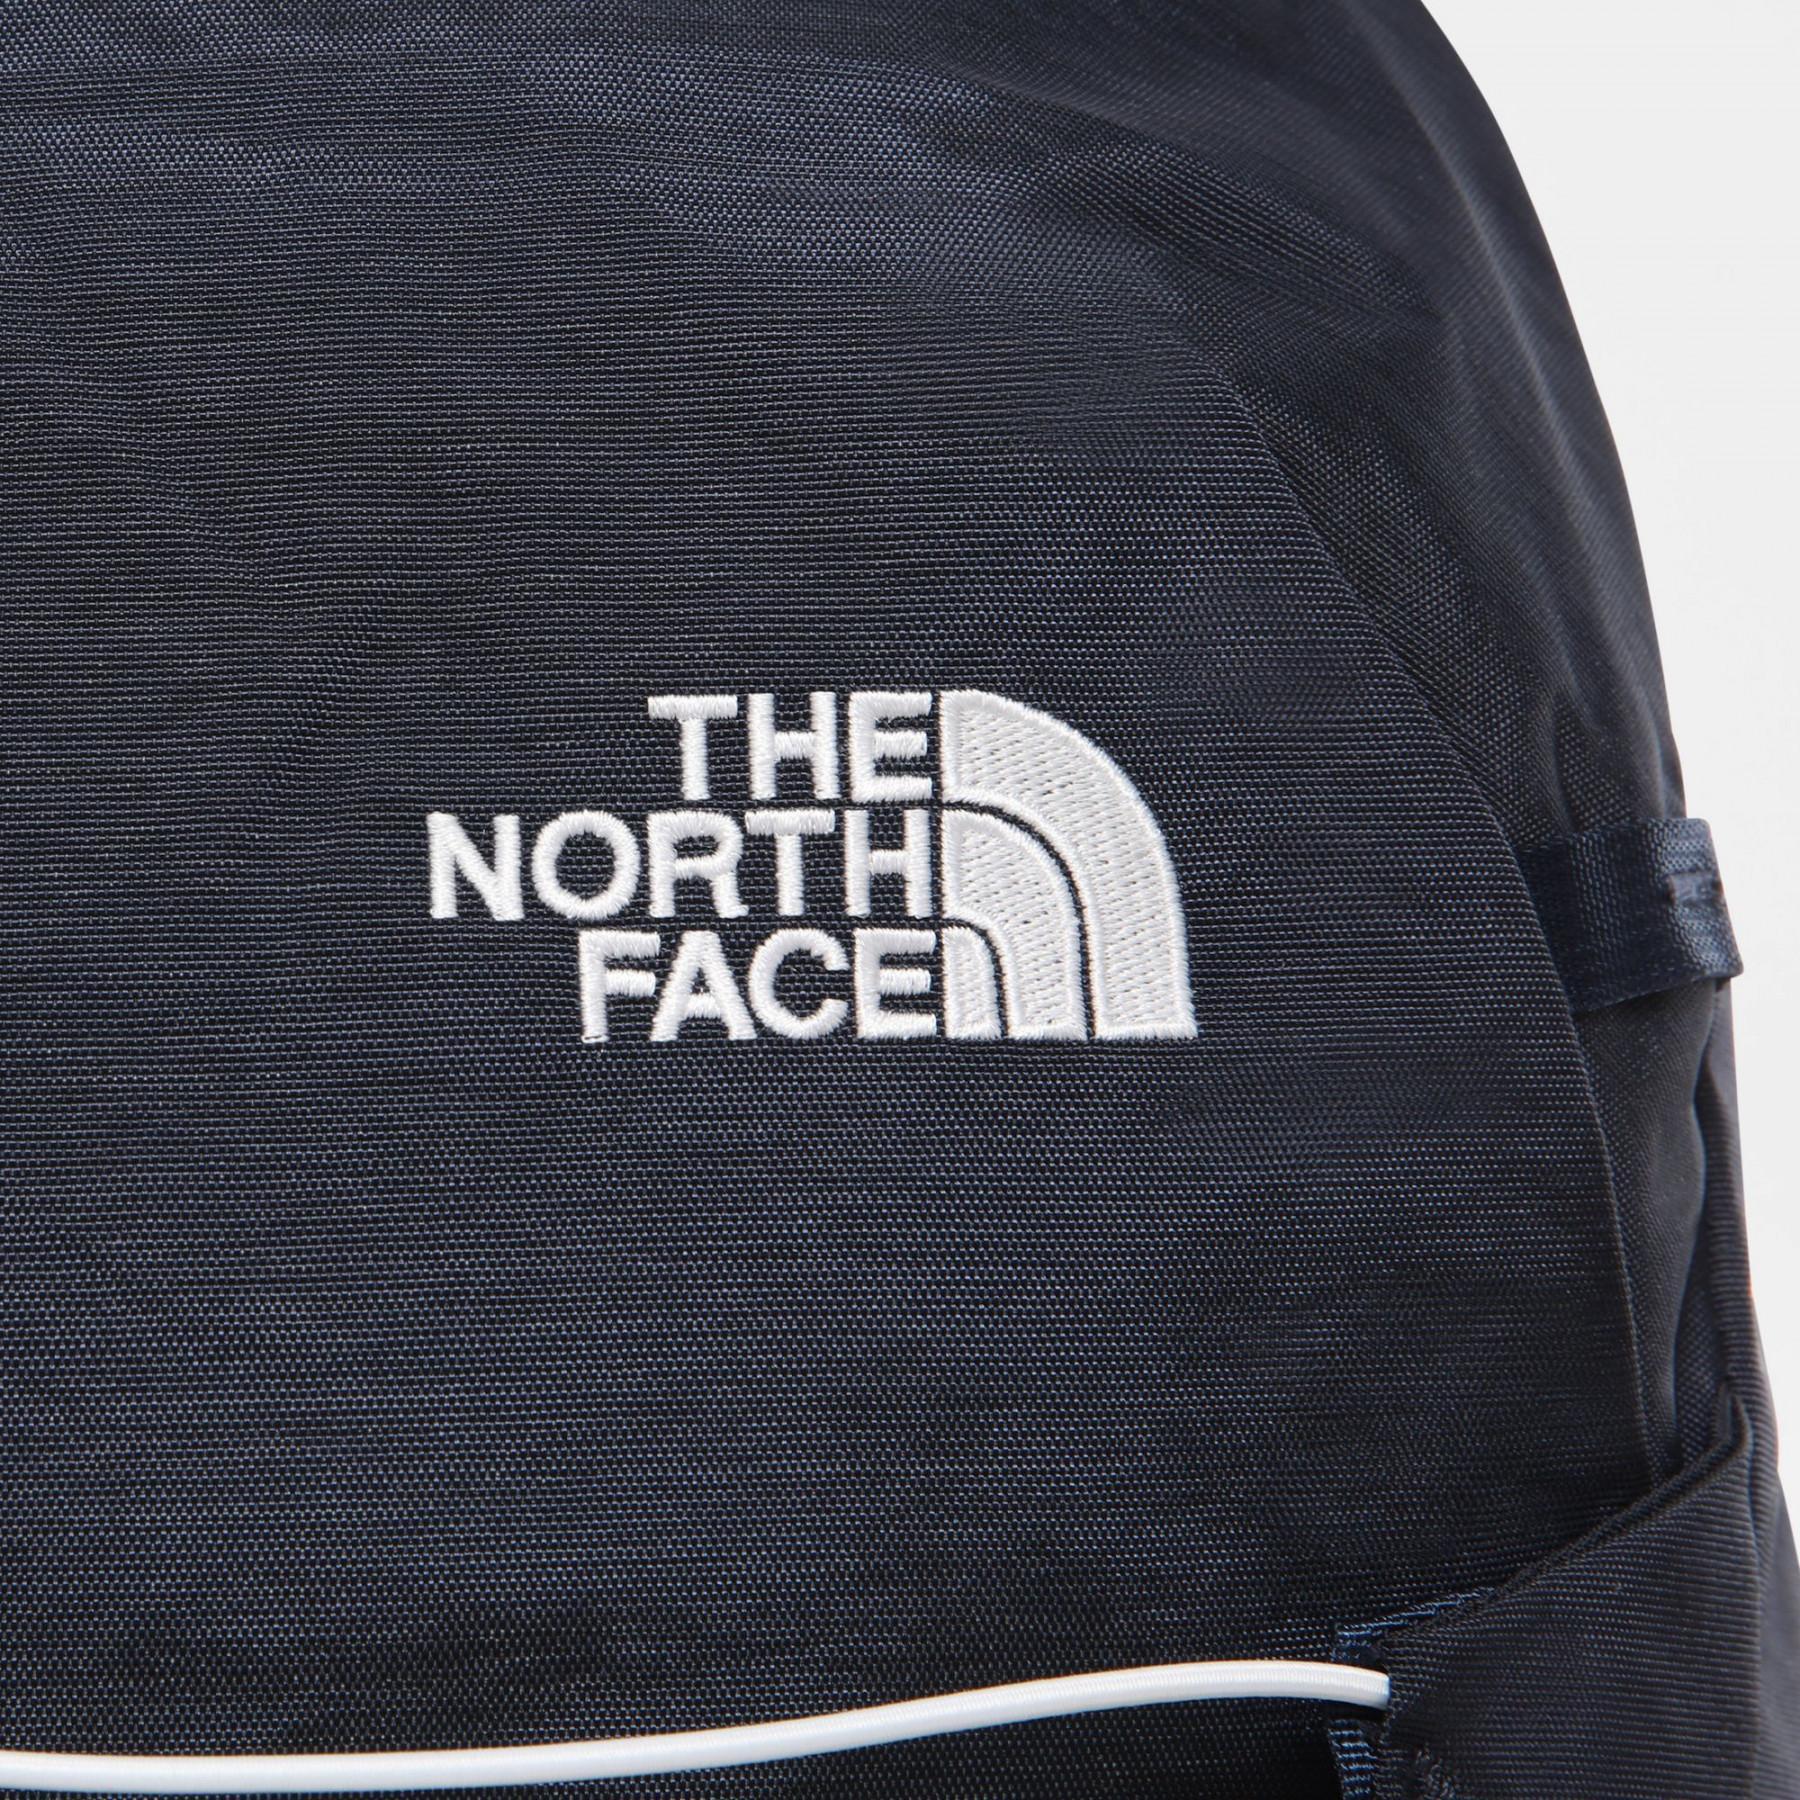 Backpack The North Face Cryptic